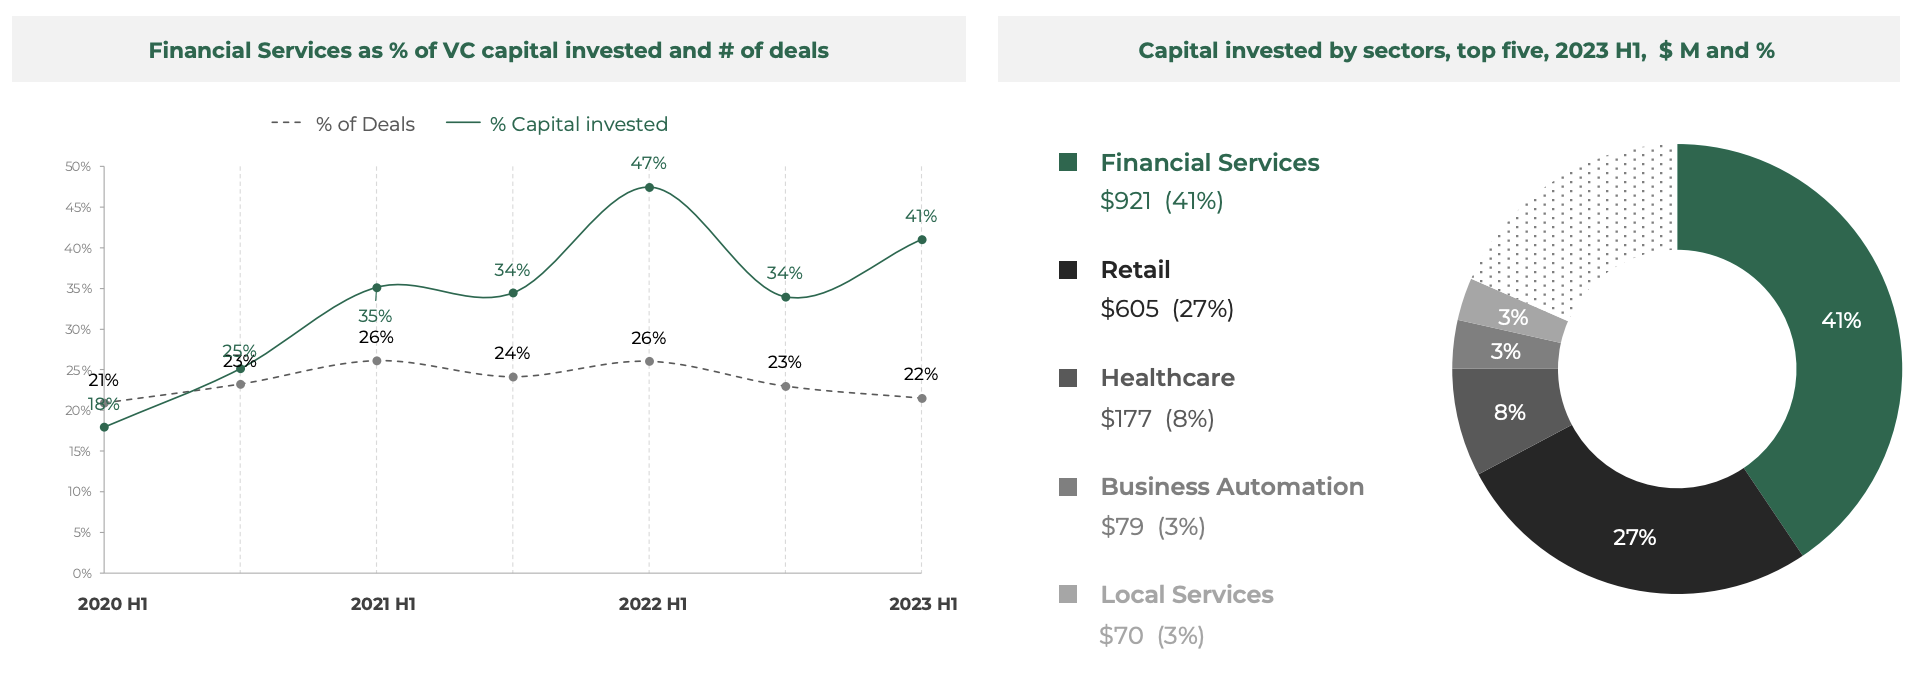 Share of financial services as % of VC capital invested and # of deals, Source: Southeast Asia Tech Investment 2023 H1, Cento Ventures, Dec 2023